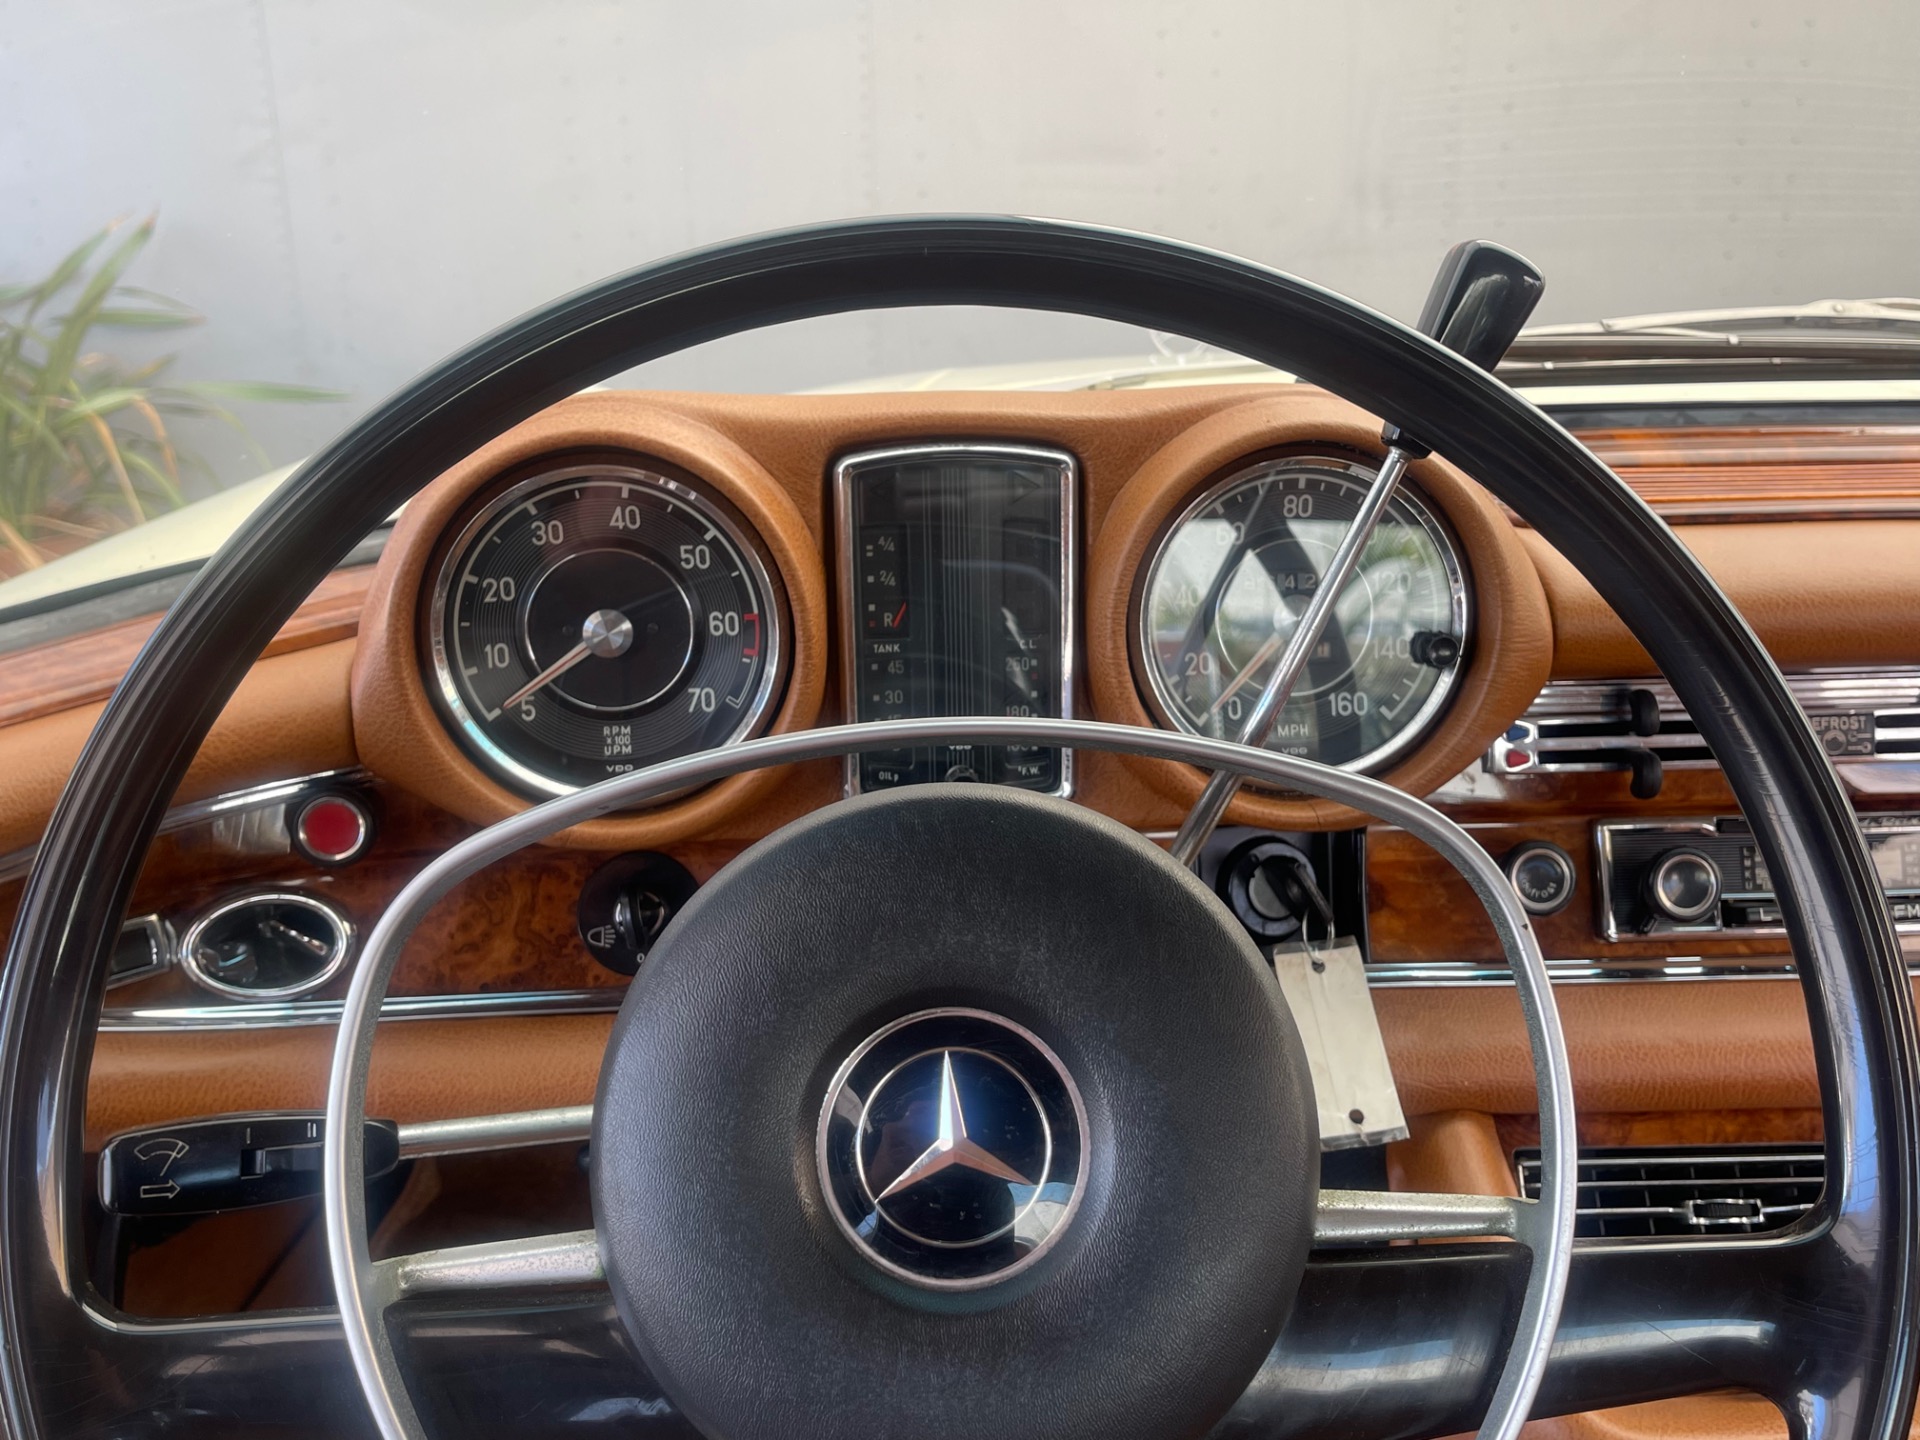 Used 1970 Mercedes Benz 280 Class 280 SE